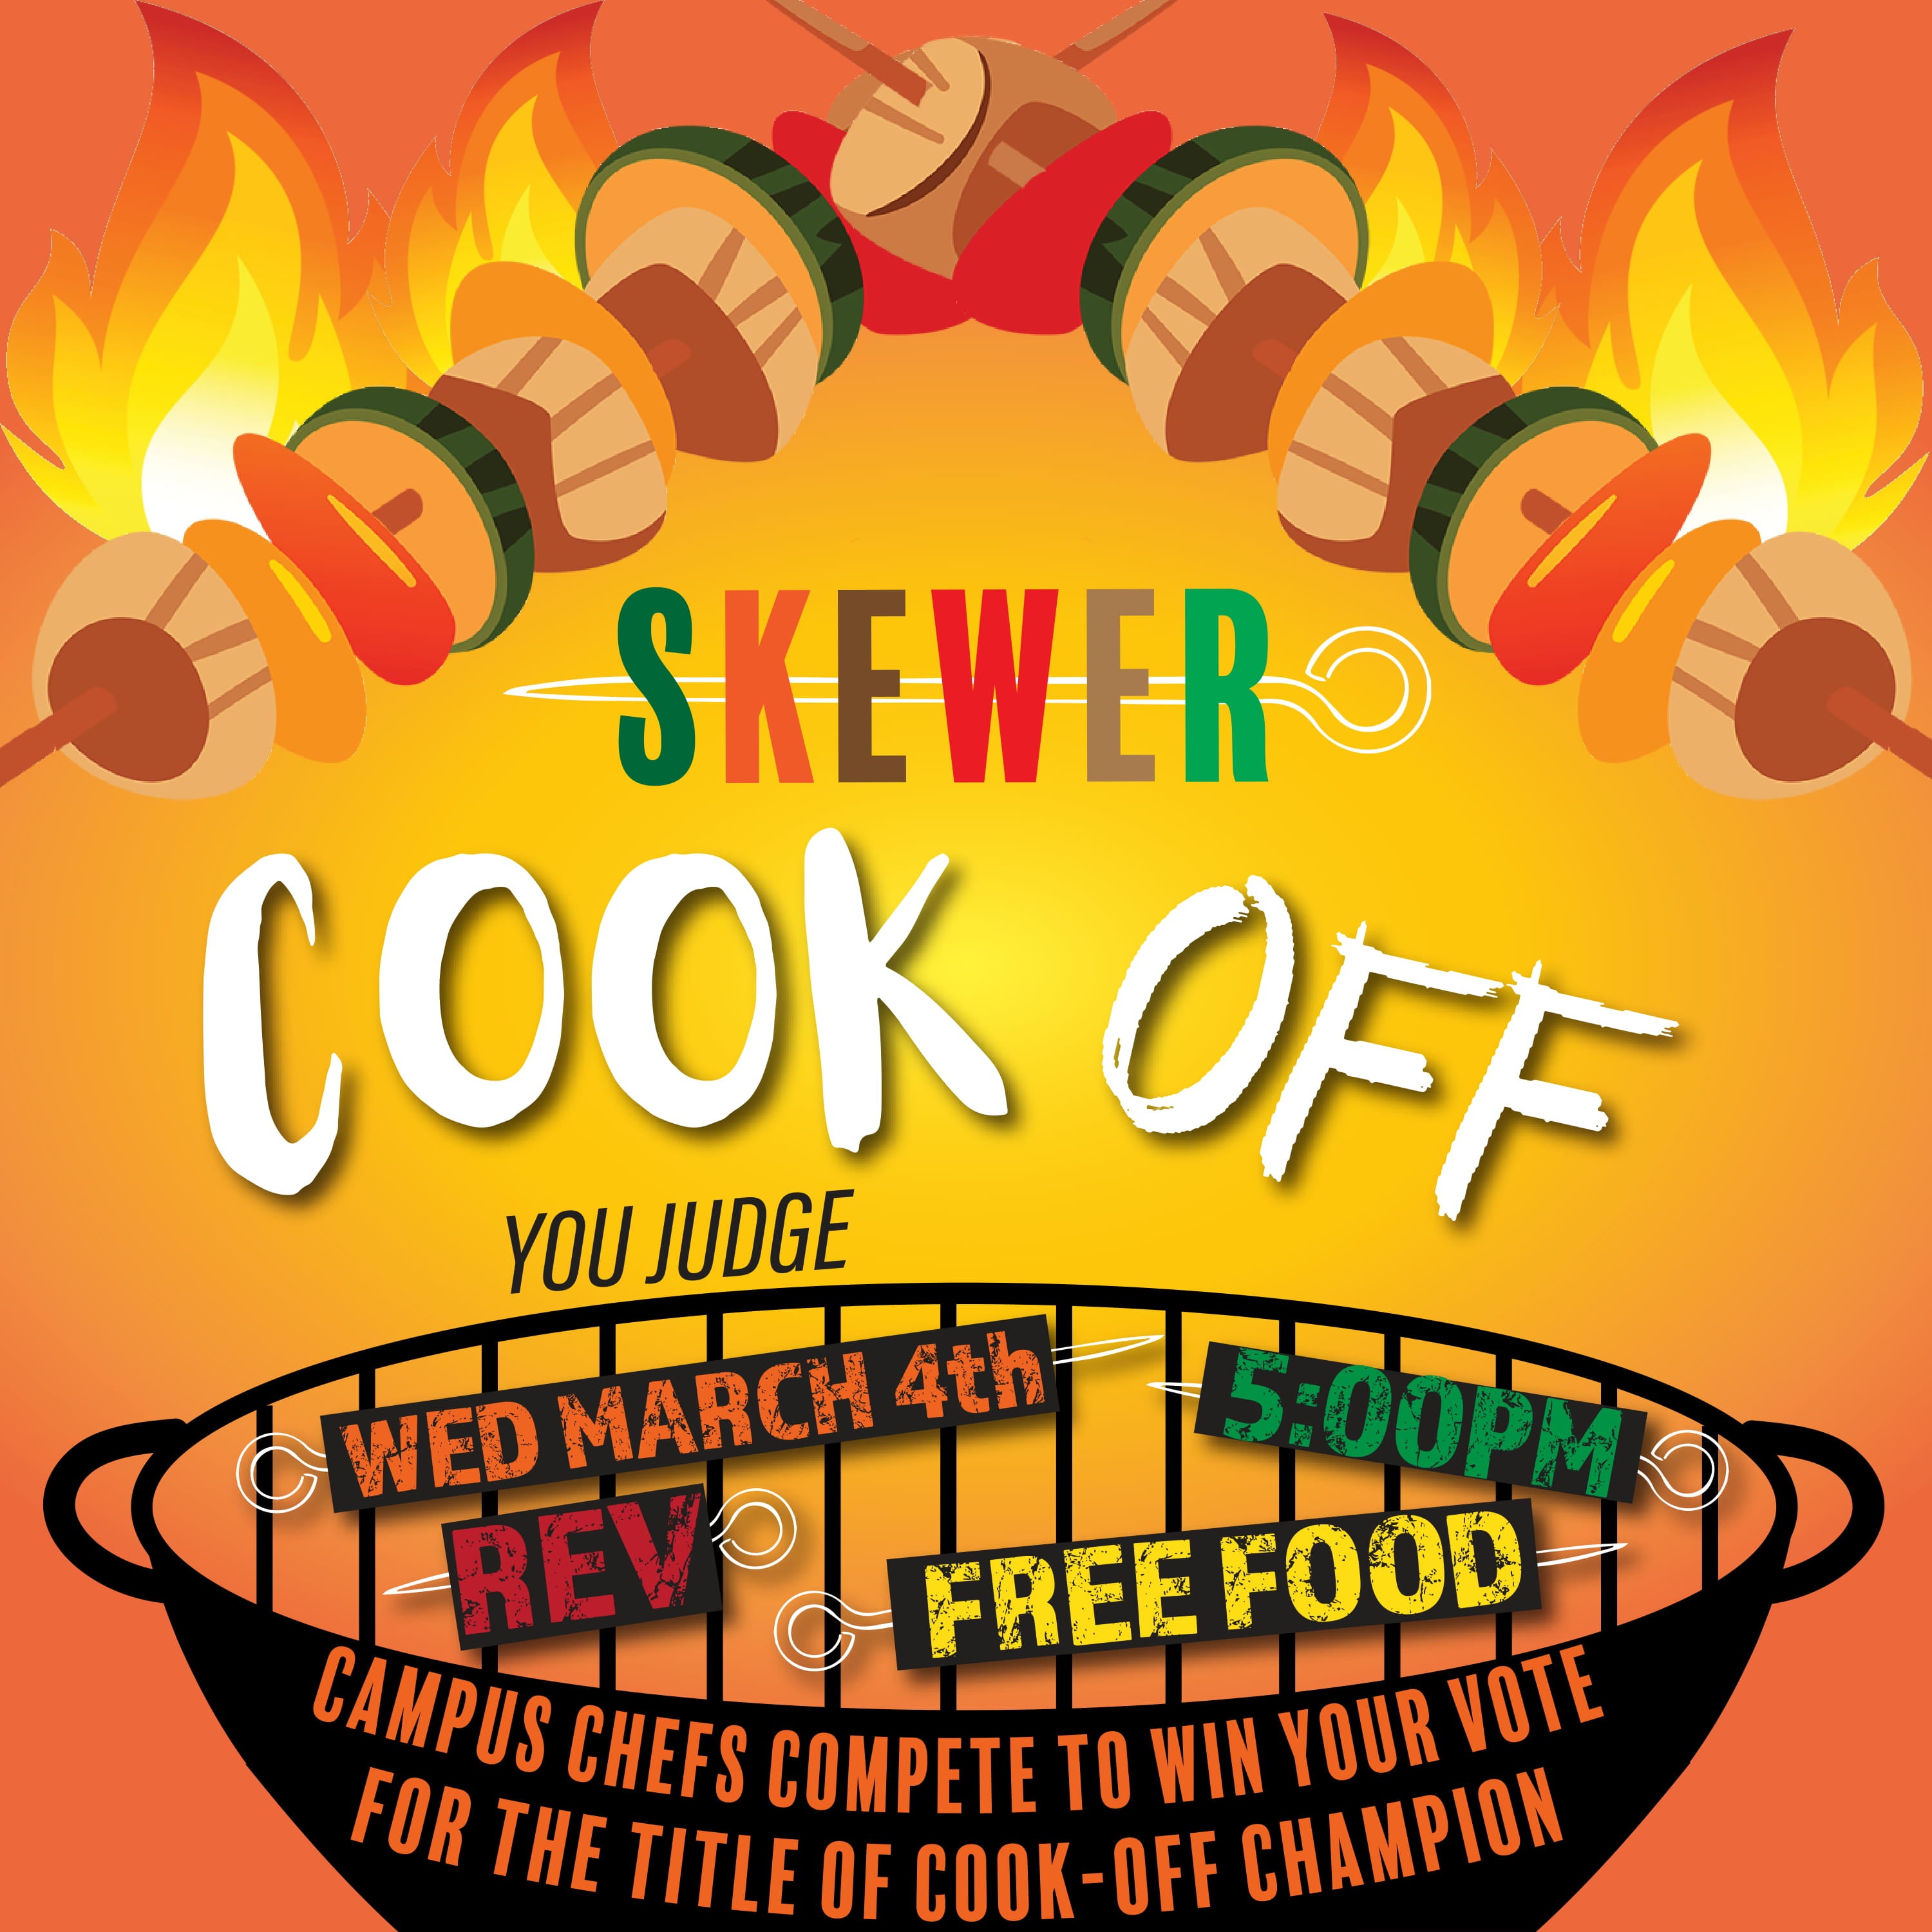 skewer cook off, you judge, Free Food, March 4